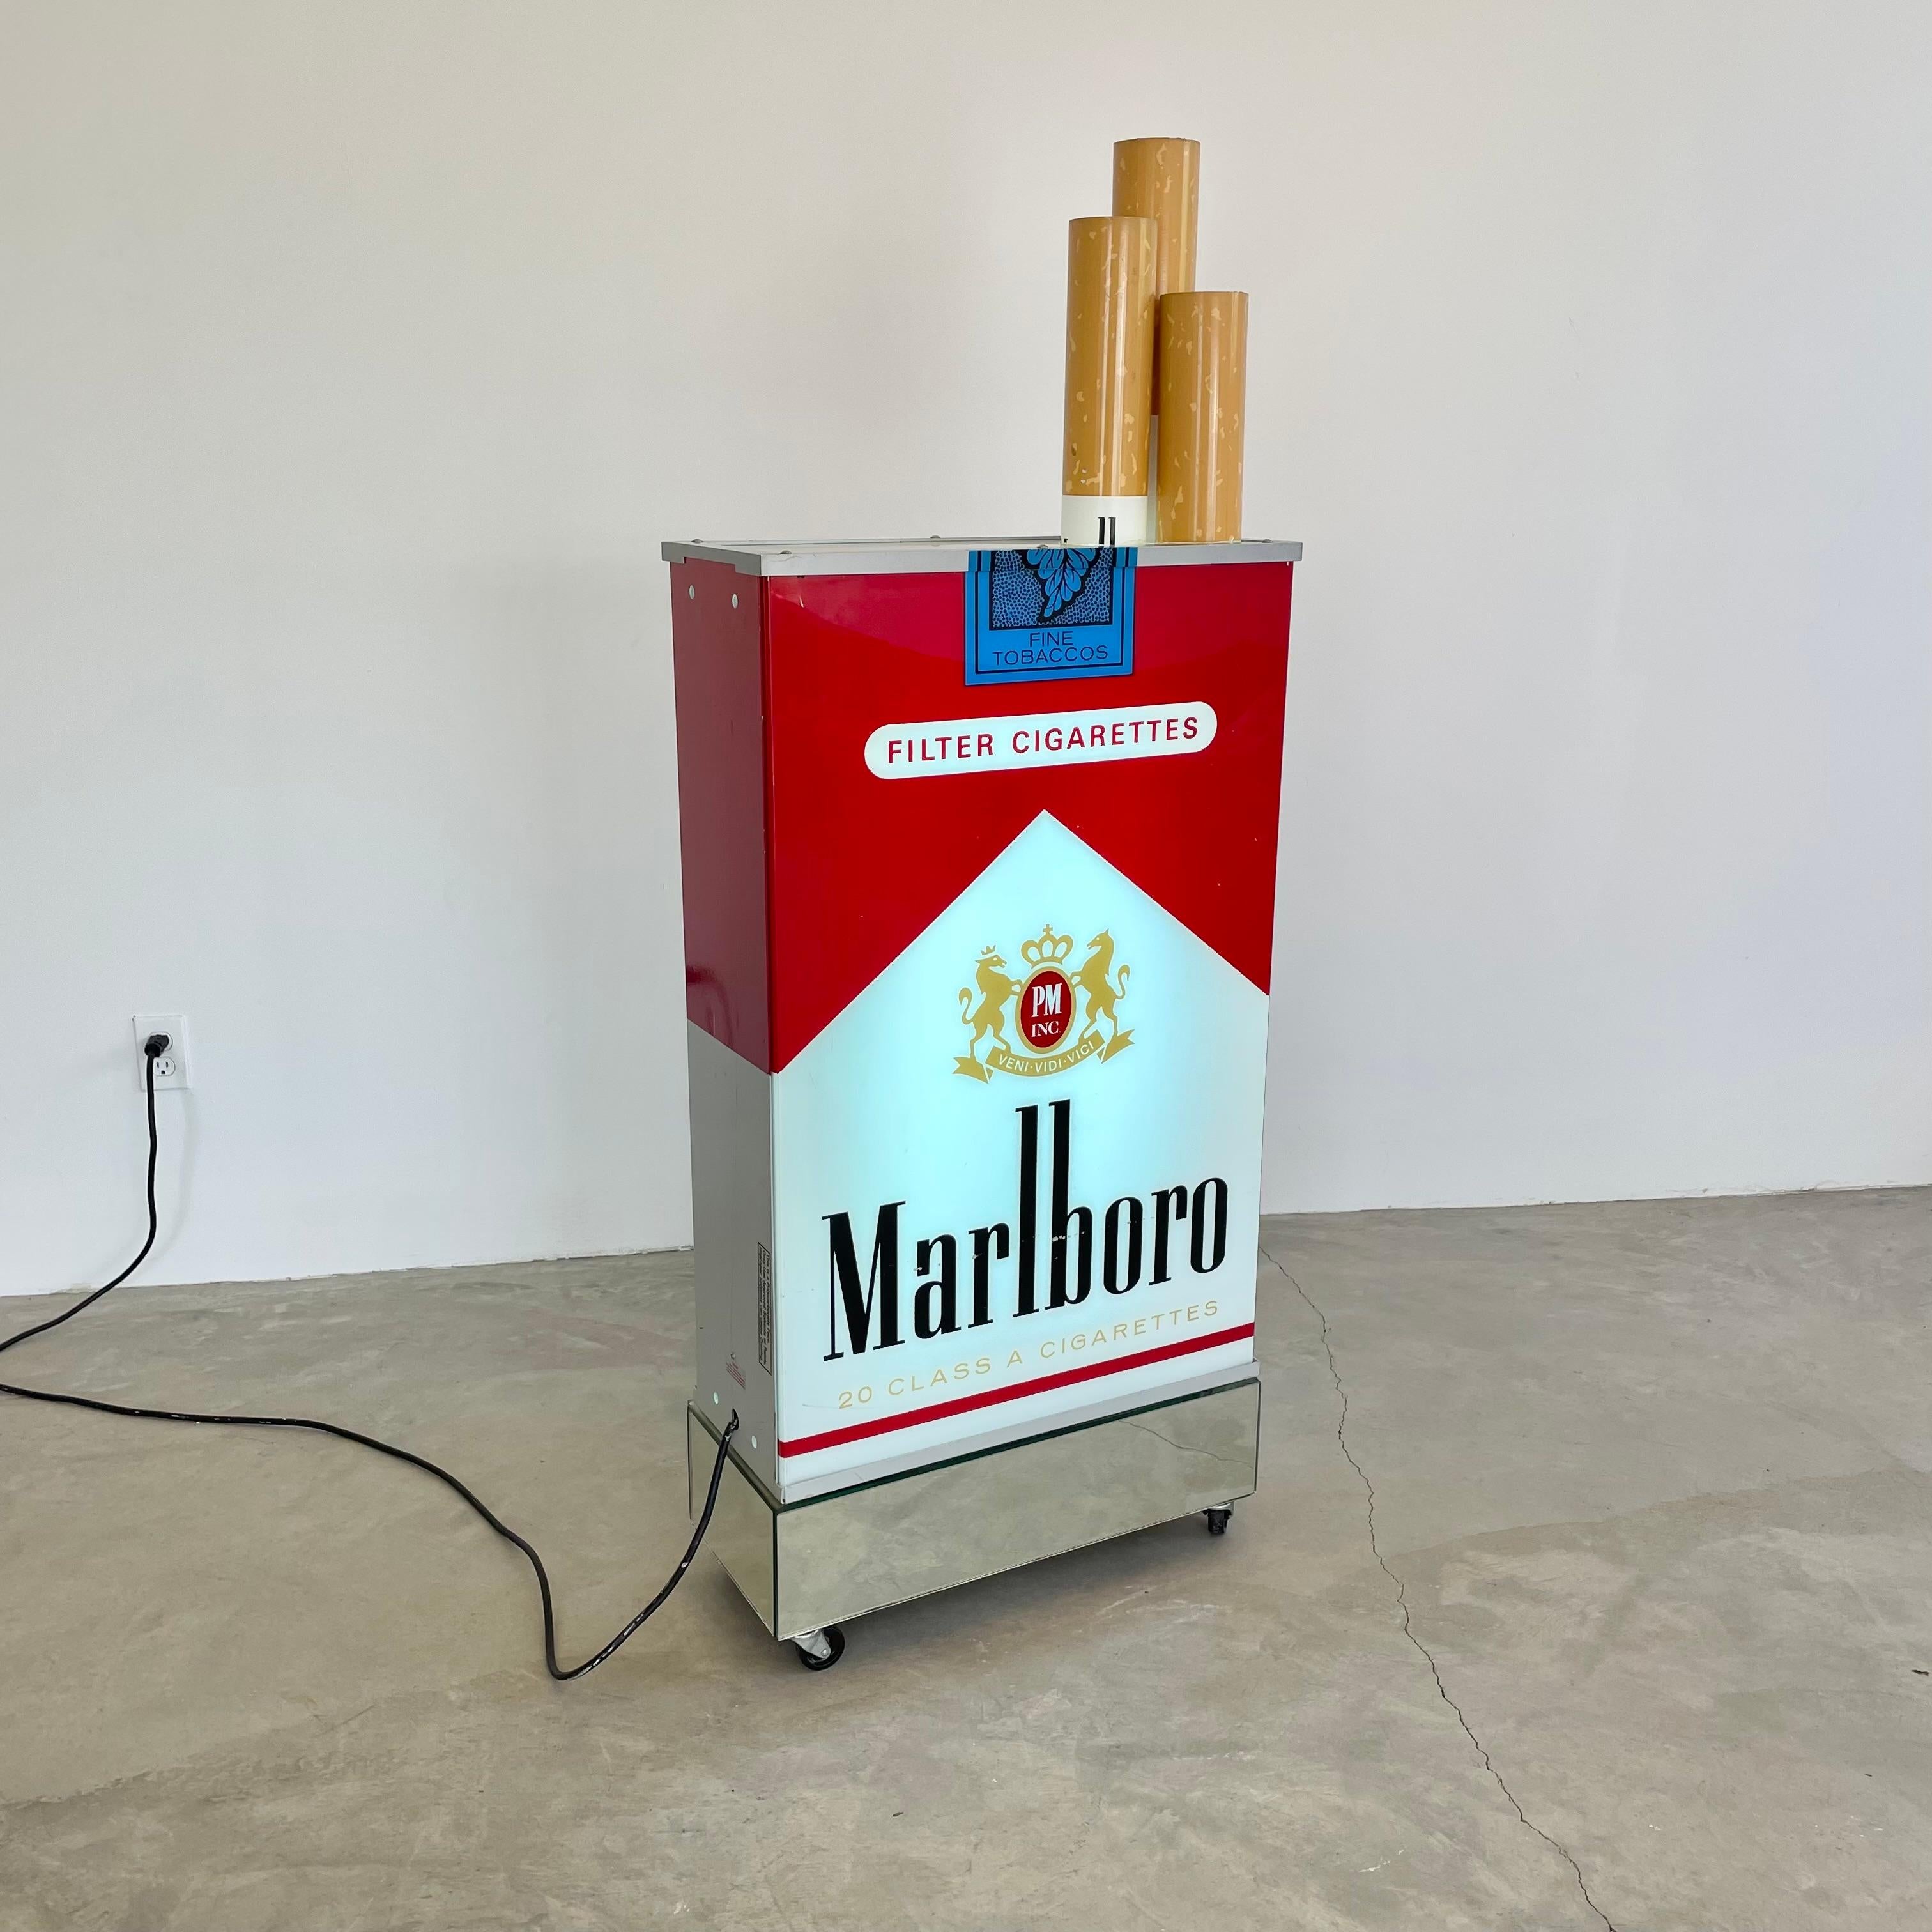 Fantastic vintage advertising light up box by Marlboro. Massive scale. Double sided. Excellent condition. Looks great hanging on the wall or on the ground. Acrylic sides and cigarettes with metal frame. Electrical works perfectly. Newly rewired.